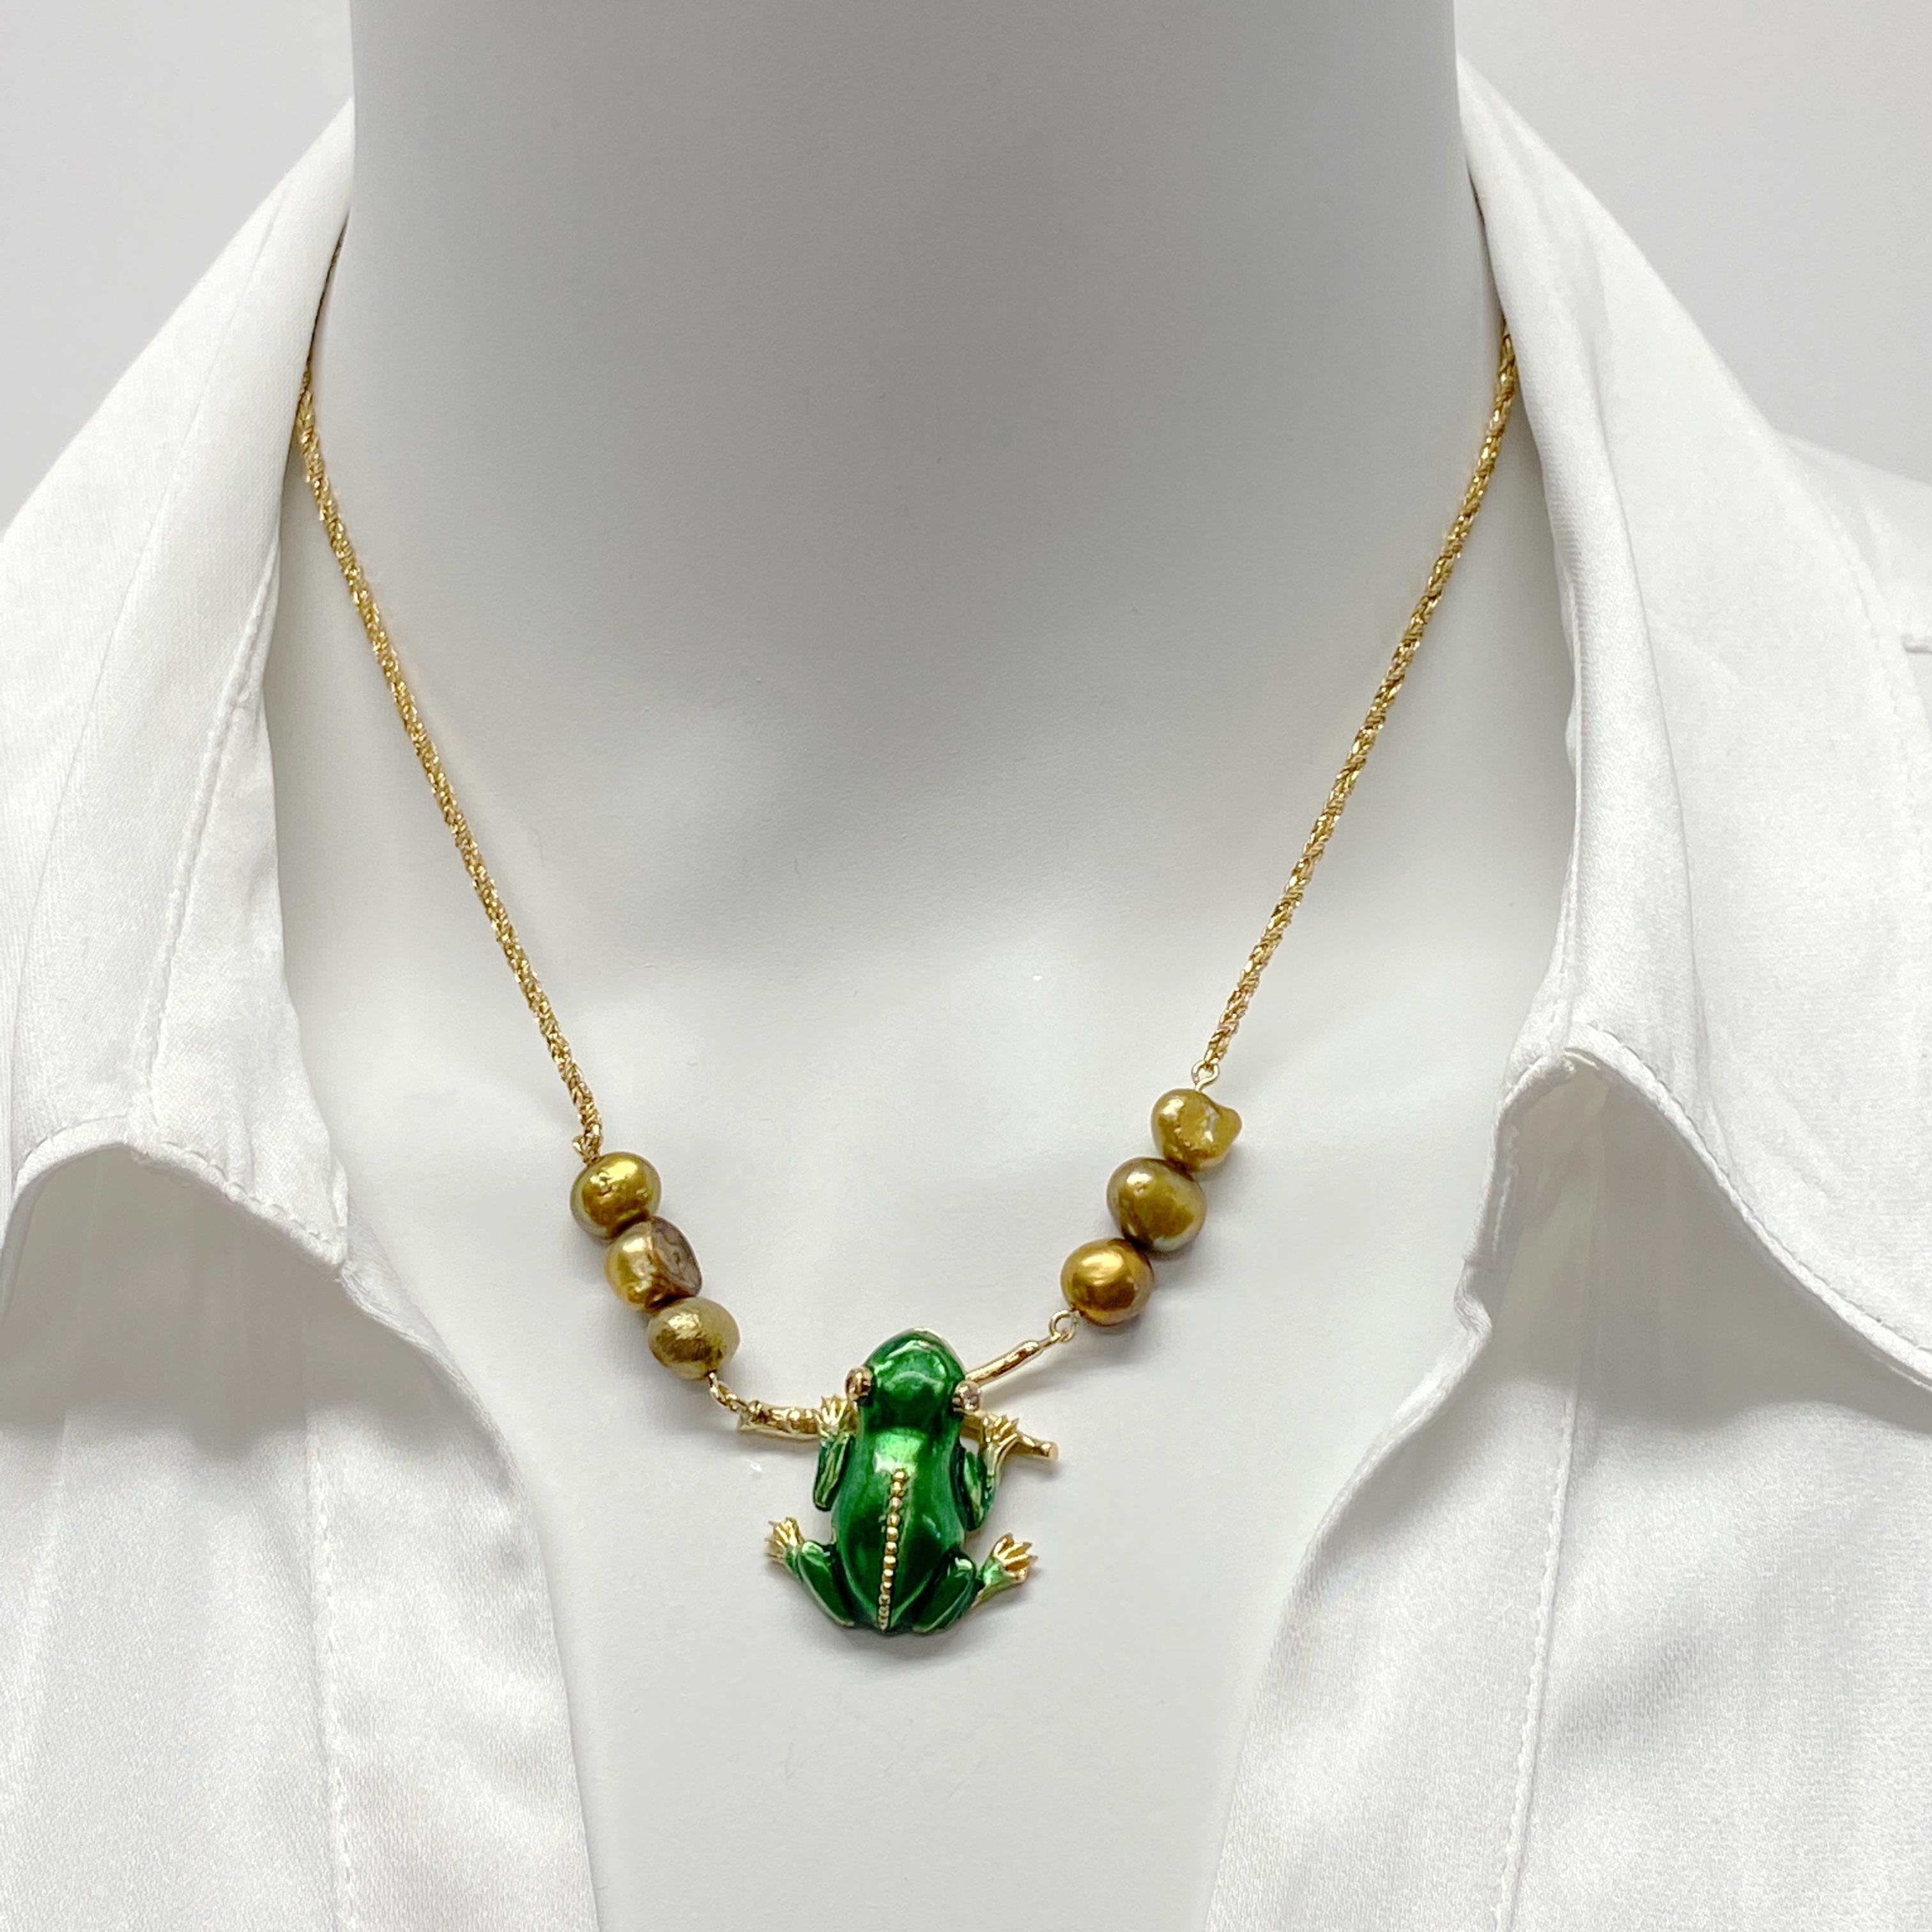 This one-of-a-kind necklace features an enamel frog pin, probably made in the early 1980s.  Eytan Brandes converted it to a necklace, stringing pearls and a chain from either end of Mister Frog's branch.  

The pearls are small dyed freshwater